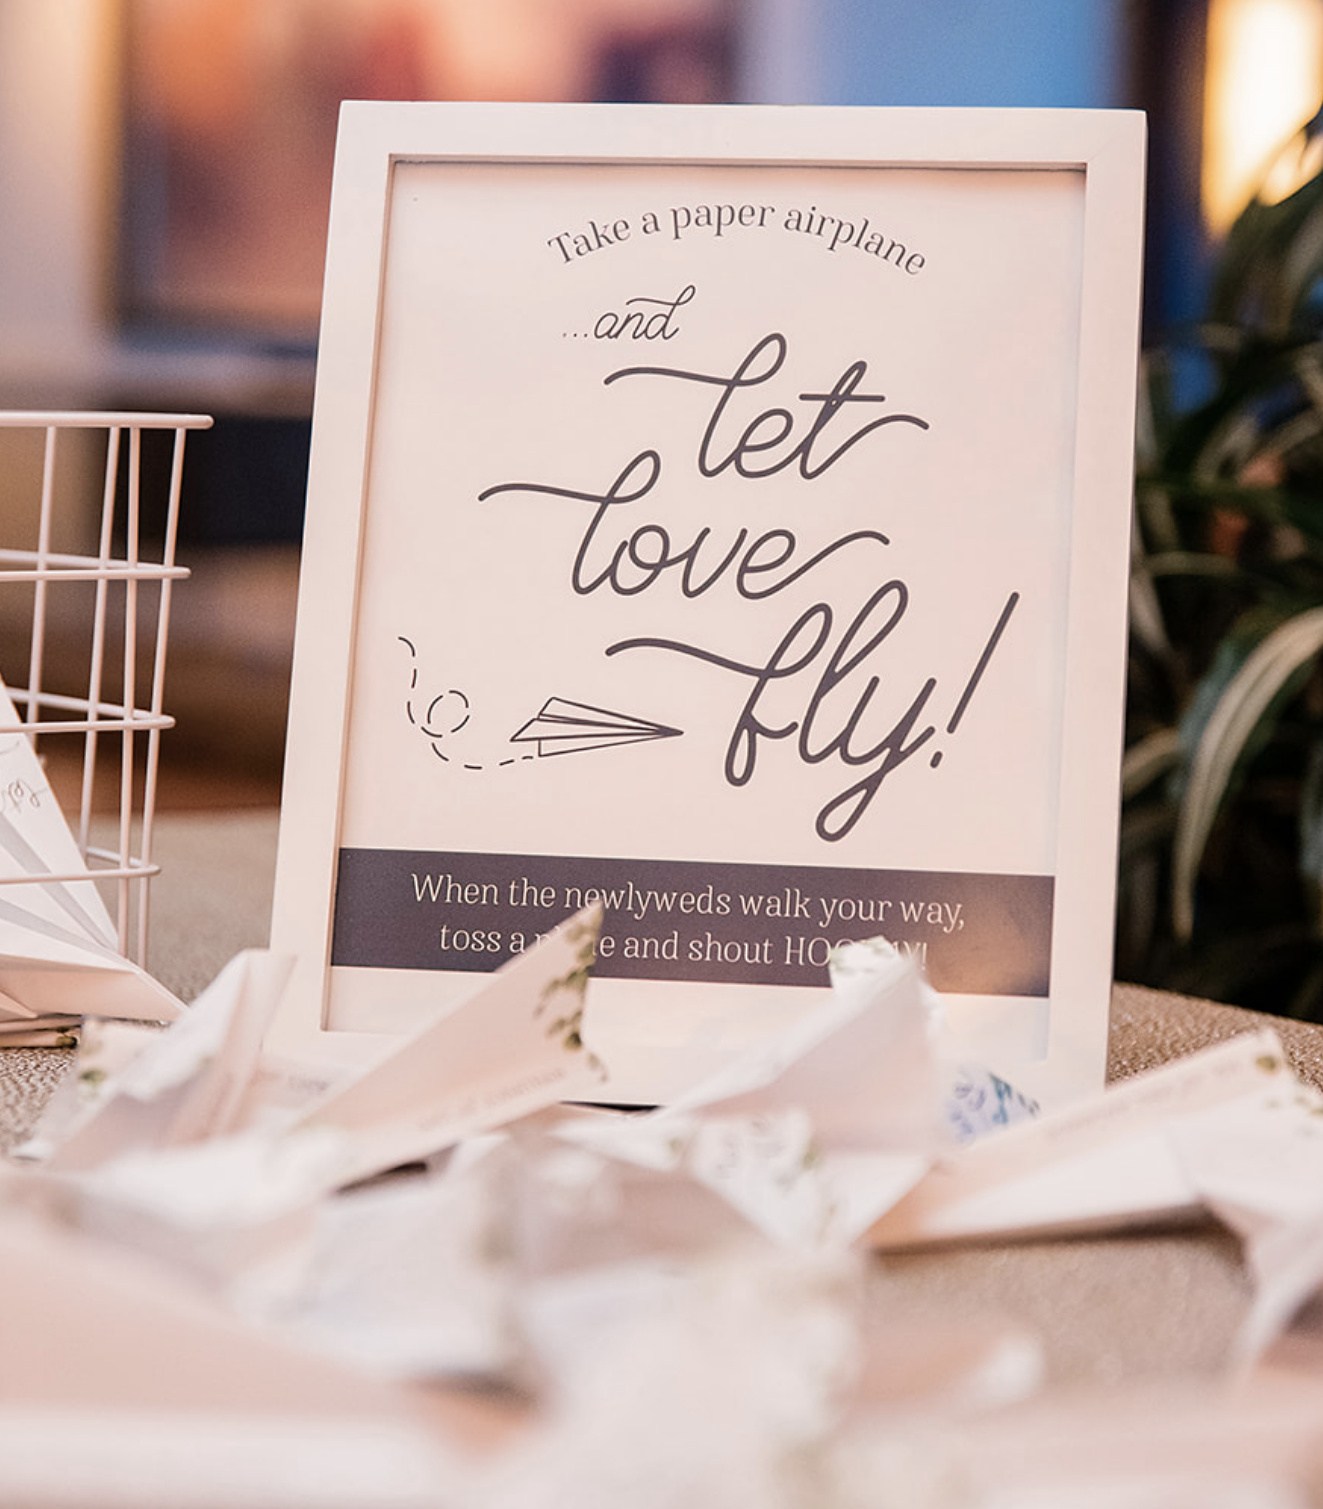 A wedding guest entrance idea, where guests fly a paper airplane to the bride and groom with a note.